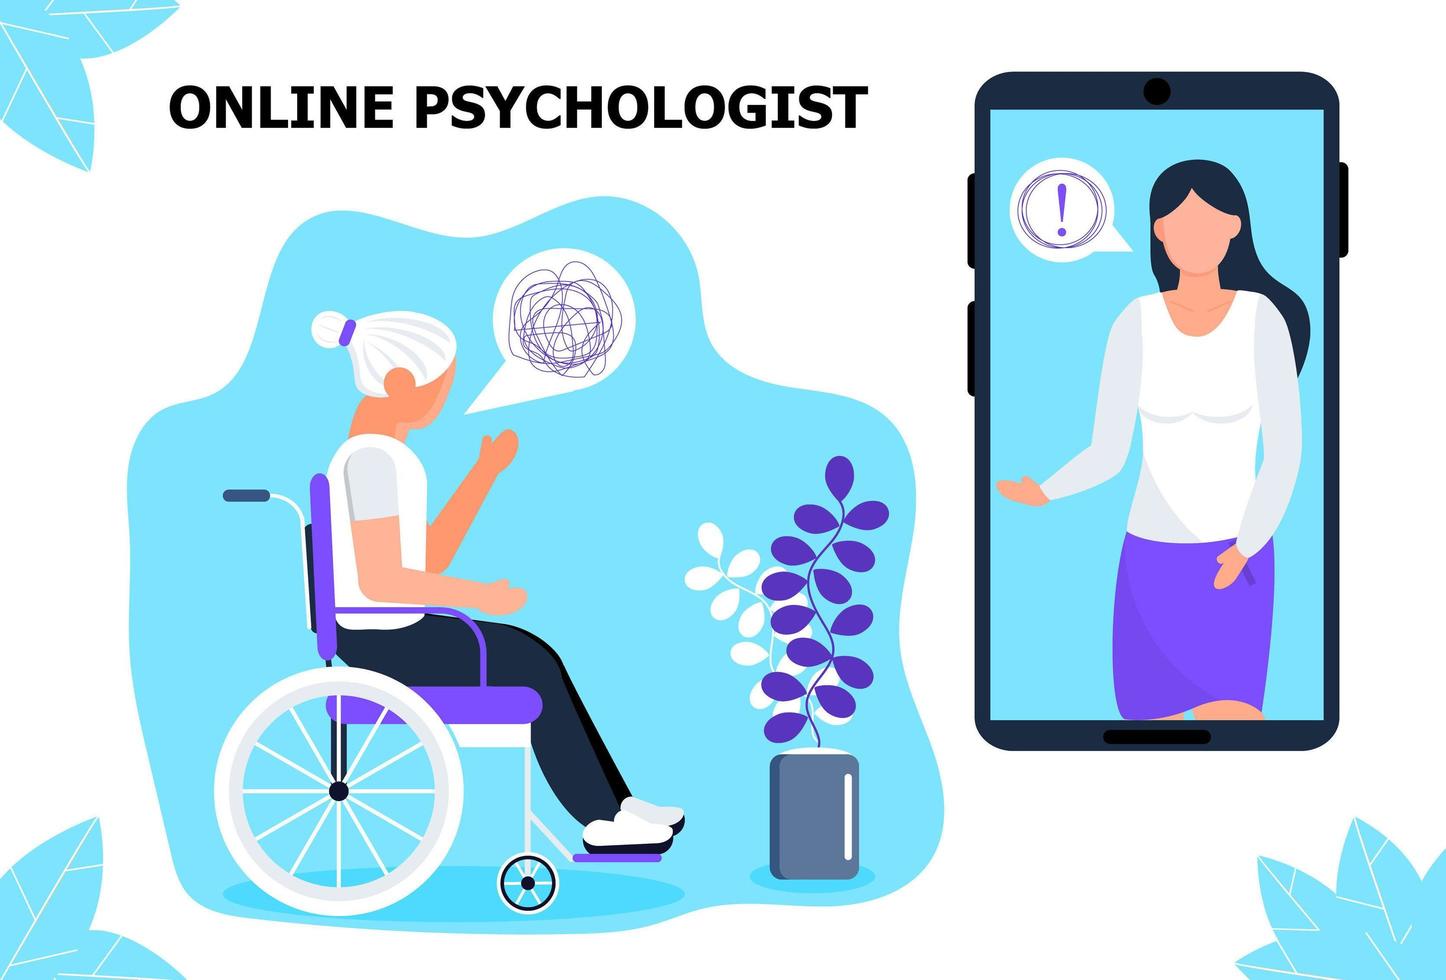 Online psychologist concept vector. Senior disable woman receive professional psychology consultation. Depression, sadness, mental health illustration in flat style. Medical, online, help service vector